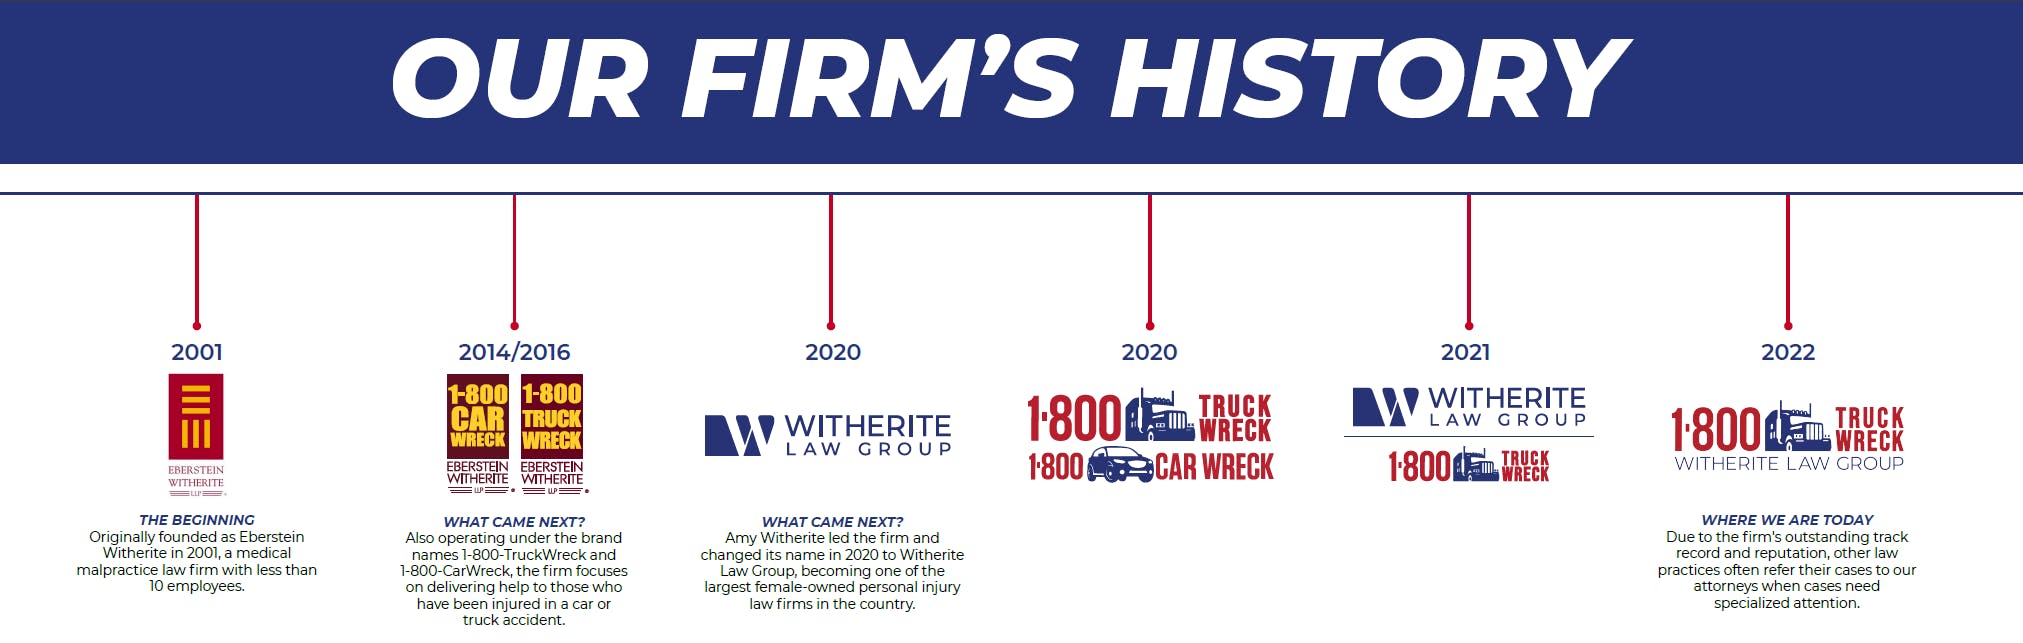 Eberstein Witherite History Timeline 